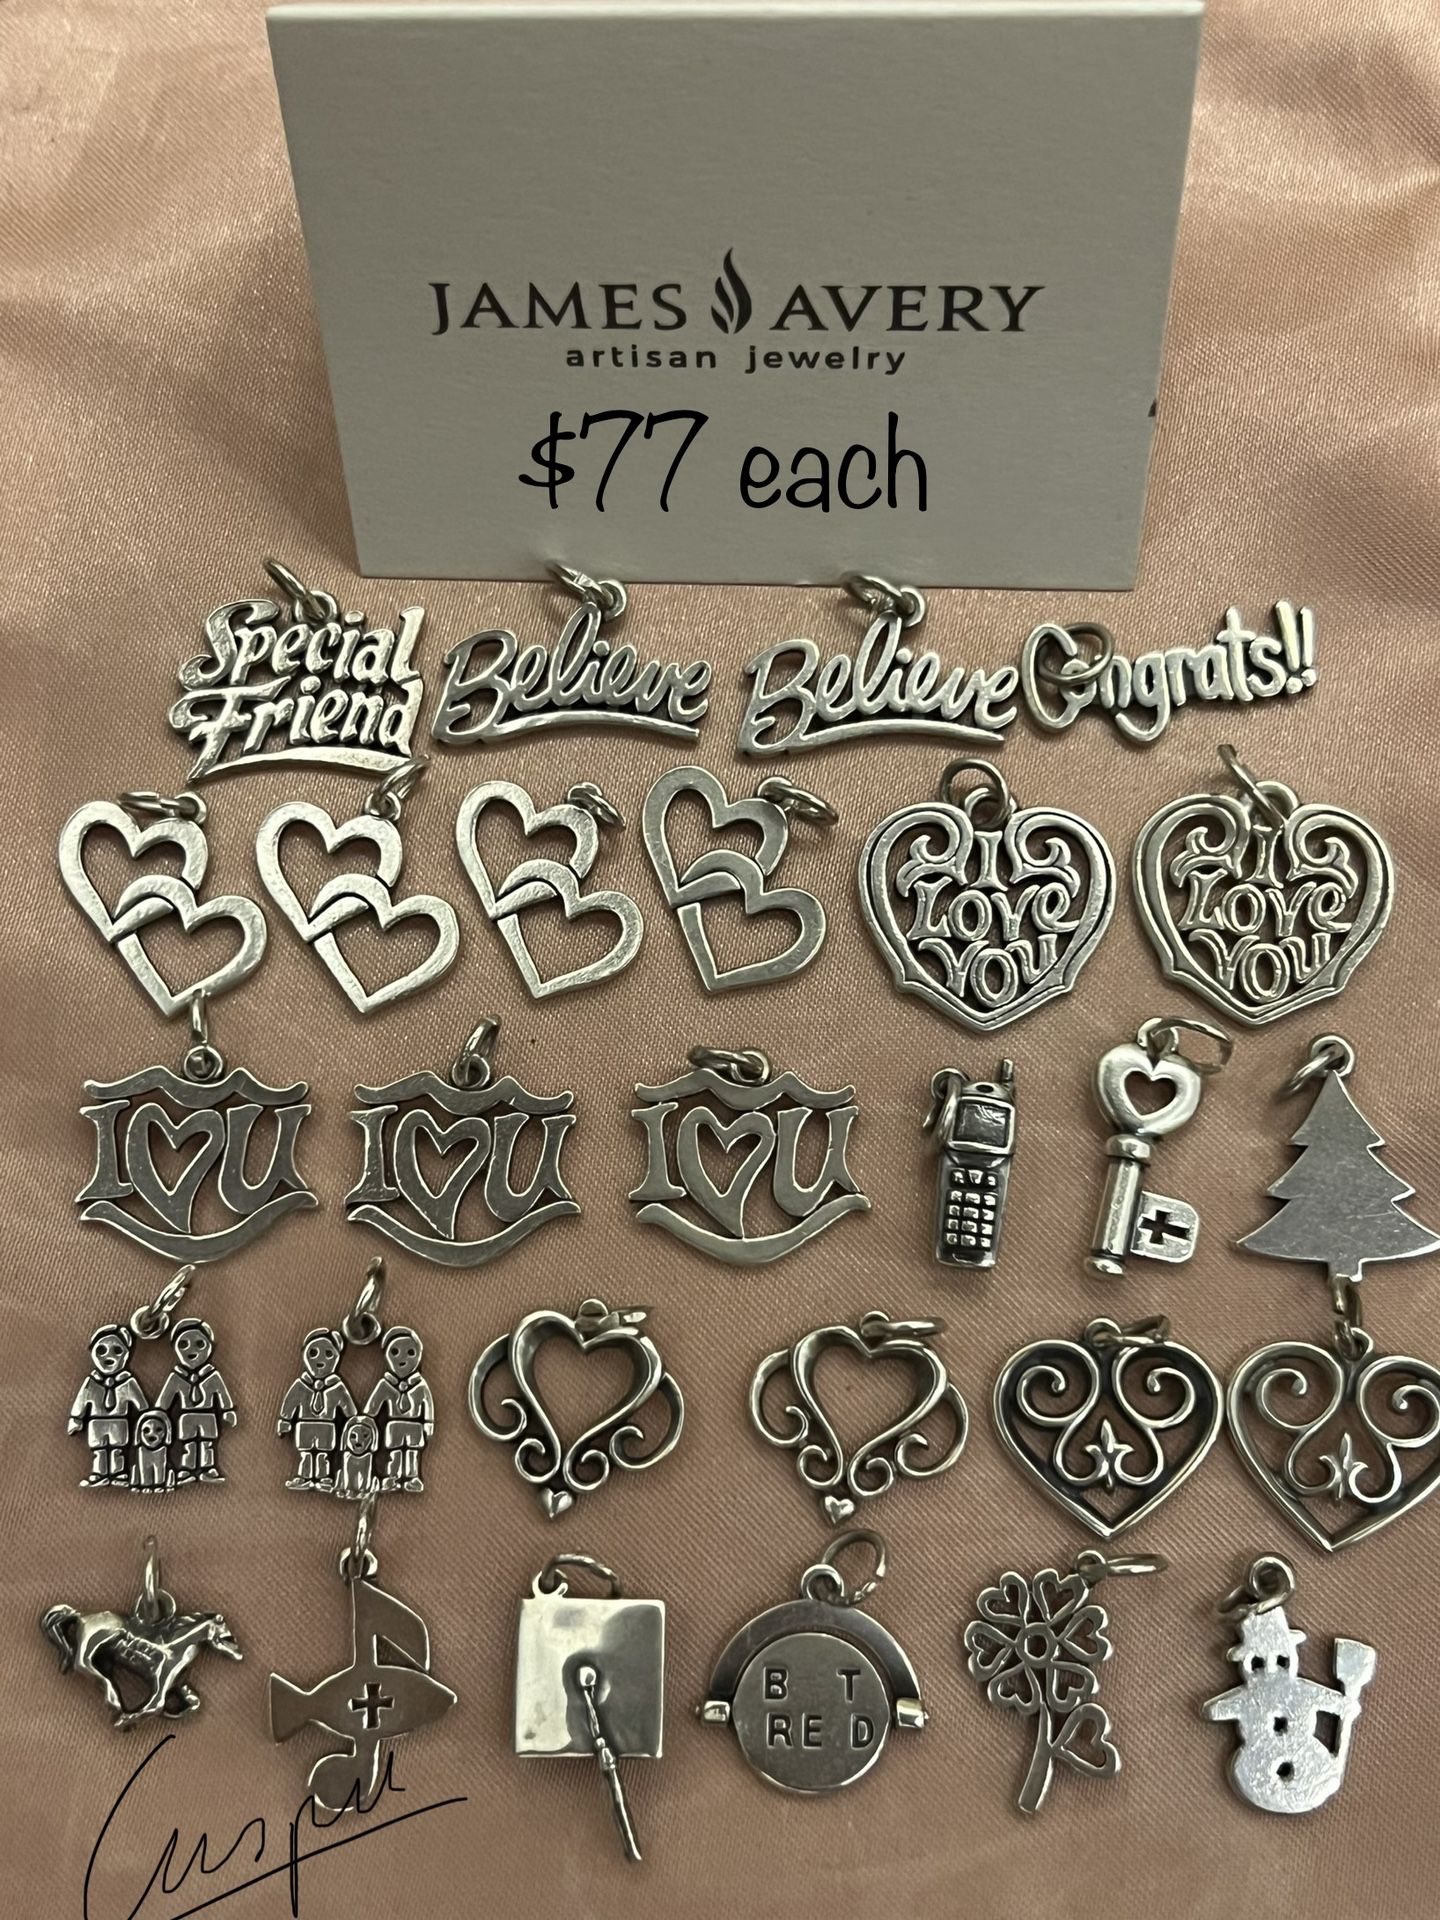 James Avery Charms $77 Each 